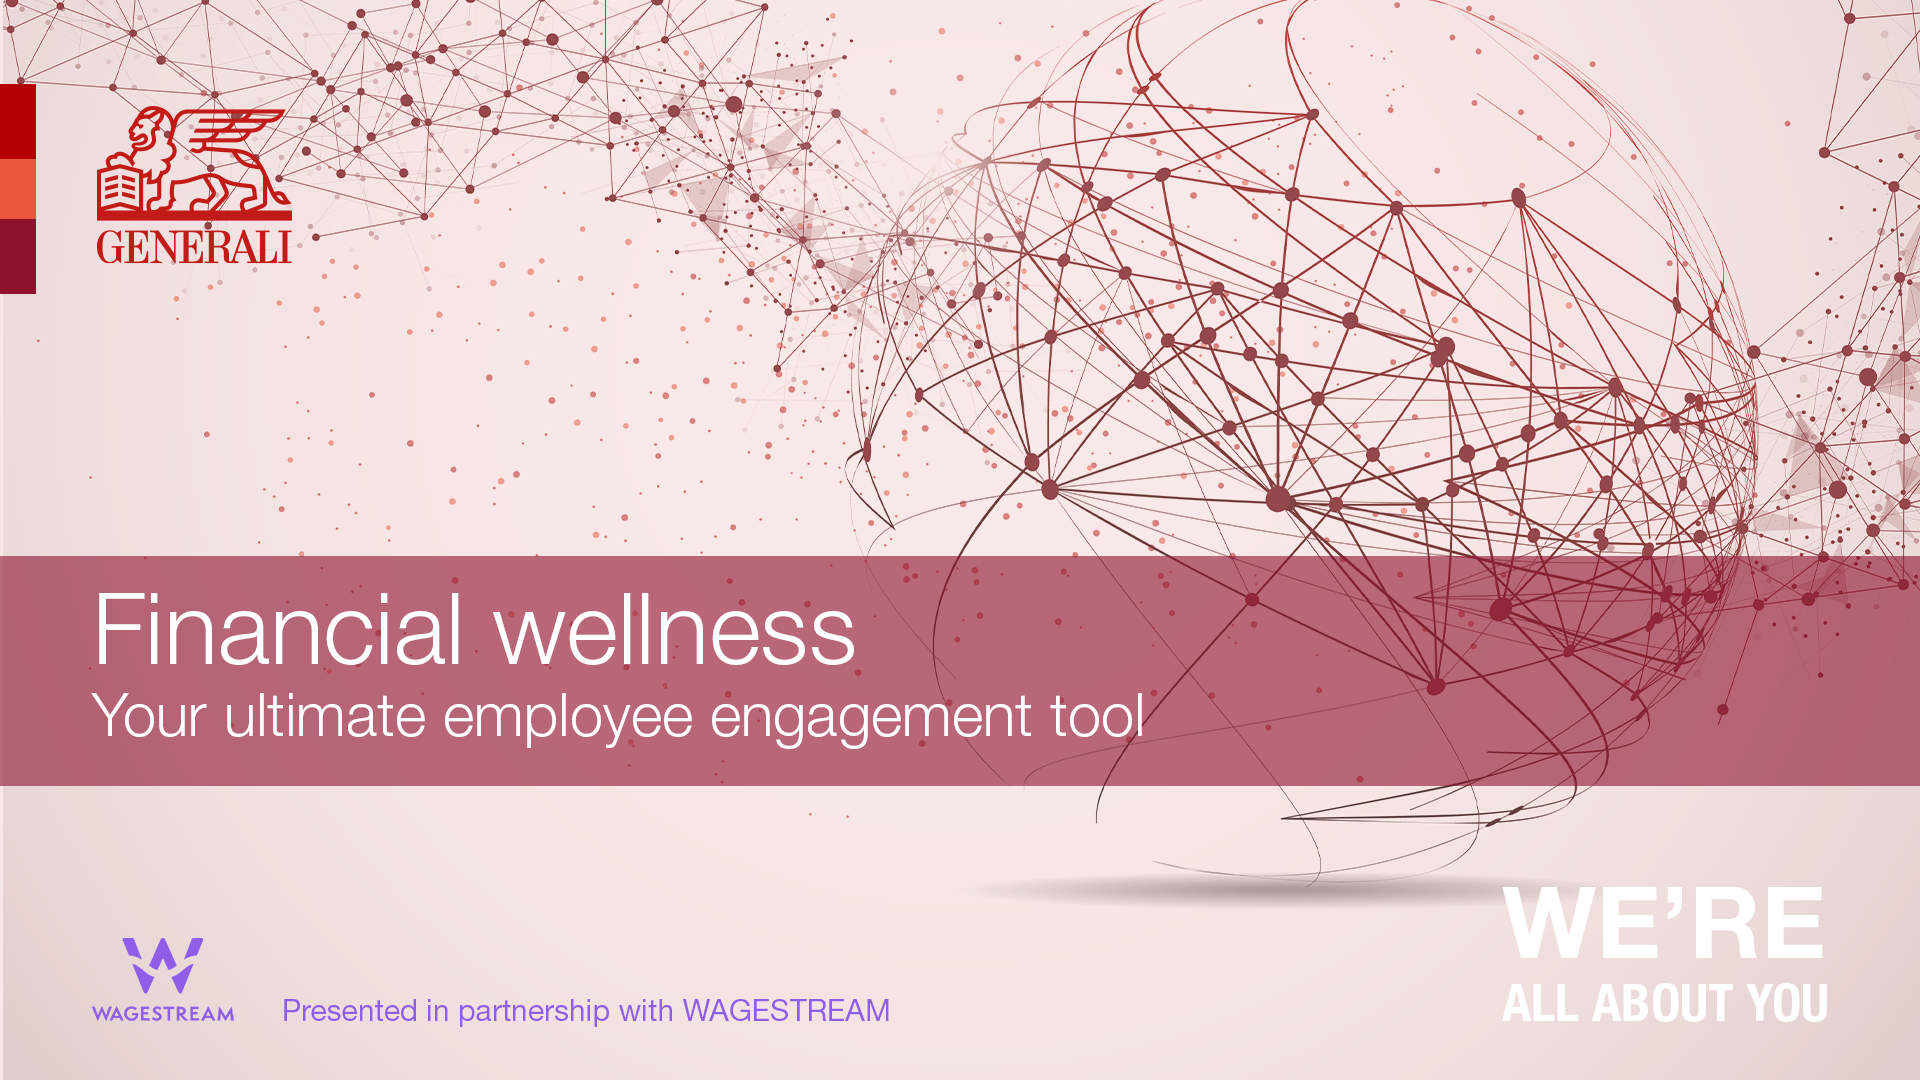 Financial wellness is a term we hear often but what does it really mean and how do employers build this into their wider engagement strategy?